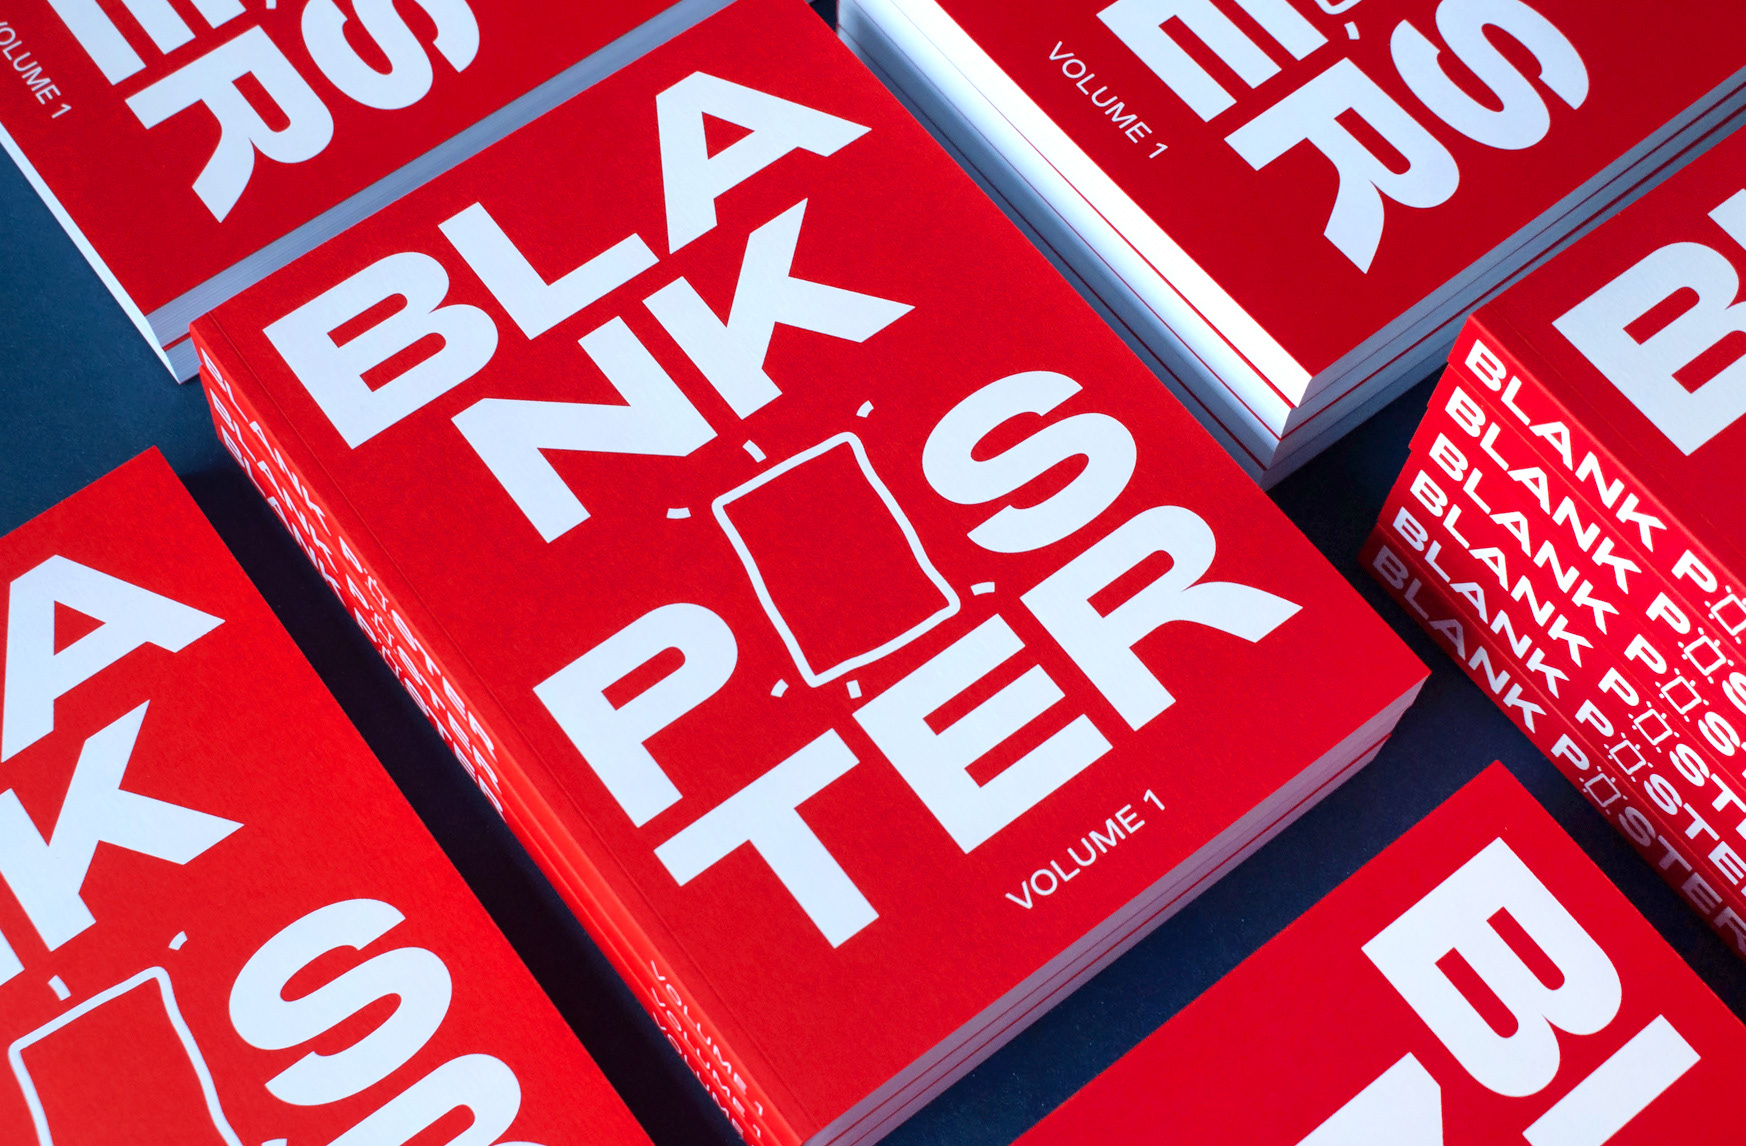 Blank Poster Volume 1 Book is Pure Poster Design Inspiration